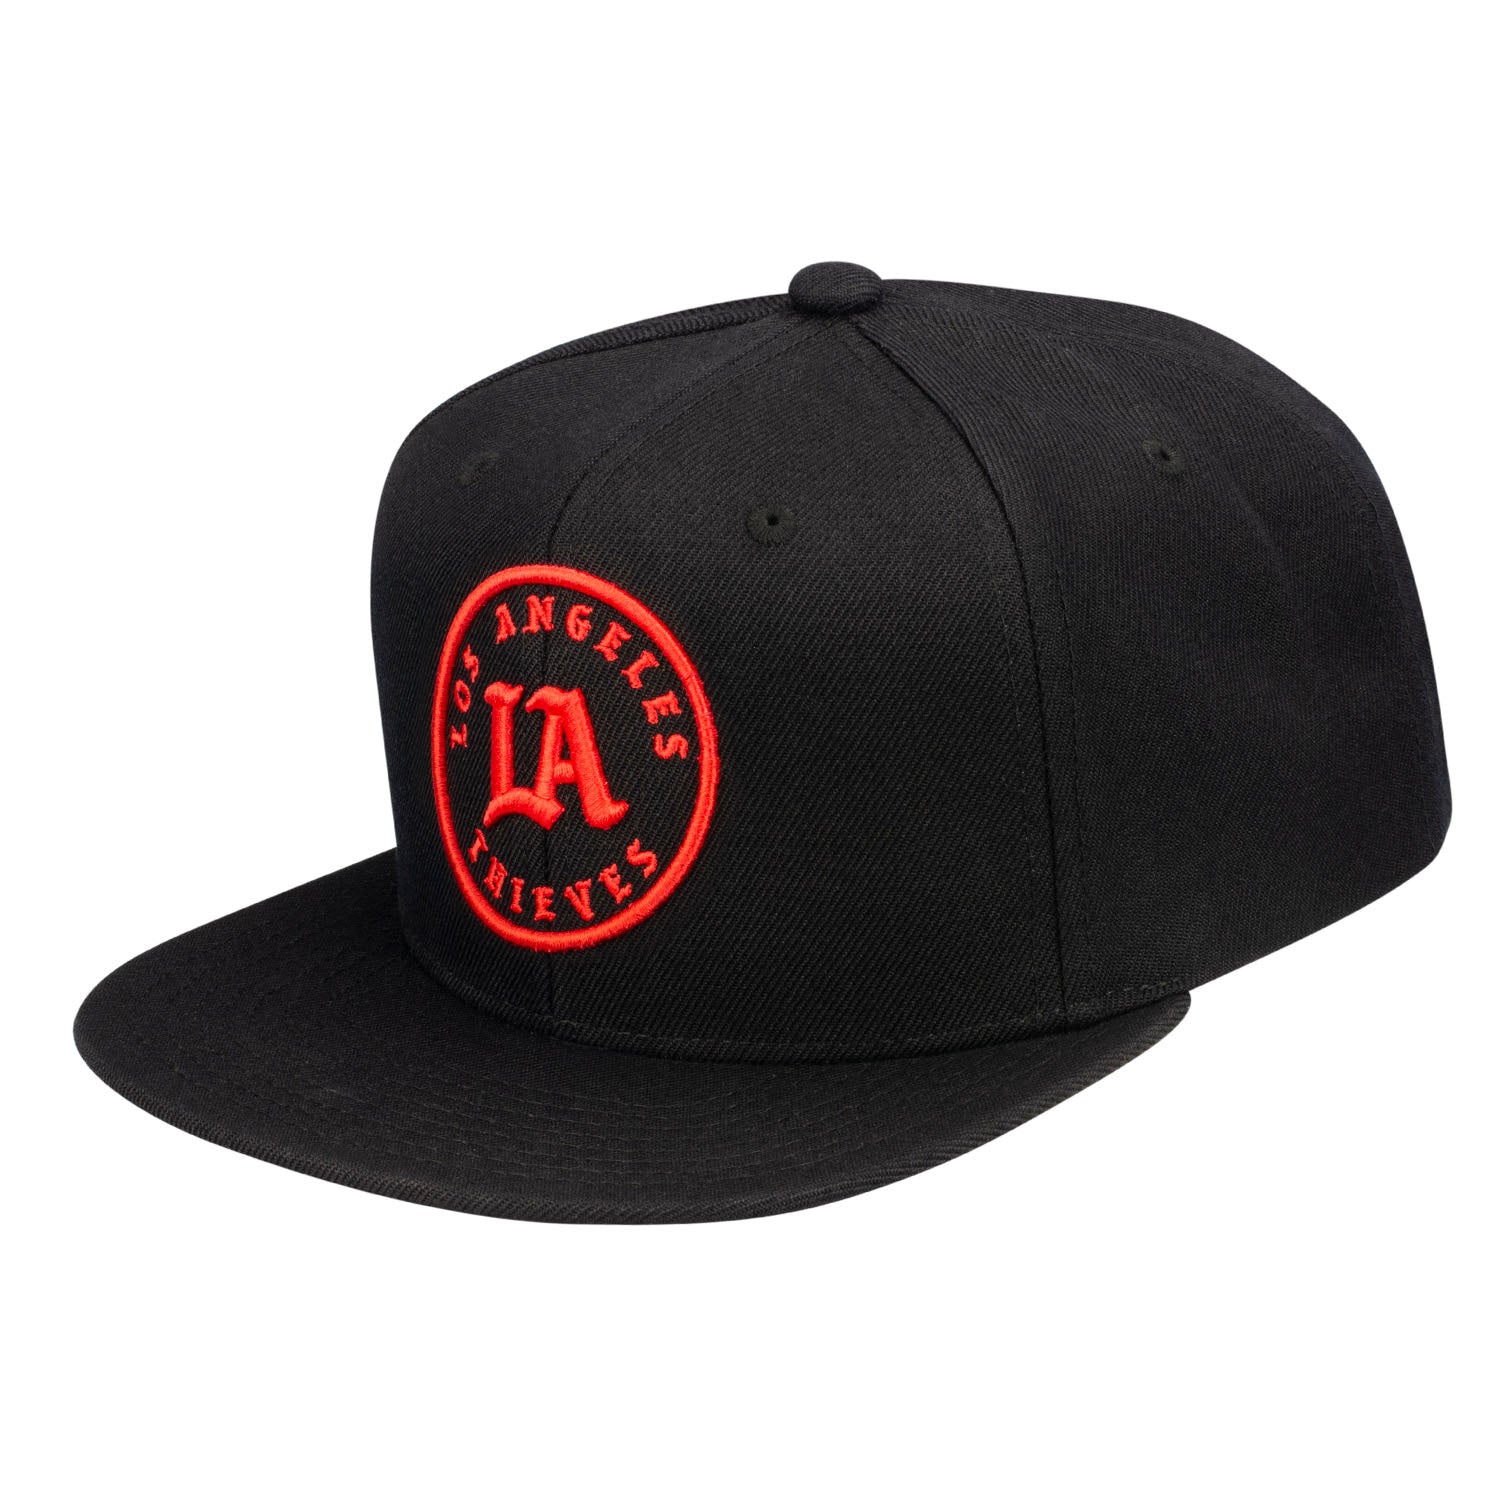 LA Thieves Mitchell & Ness Snapback in Black - Left View